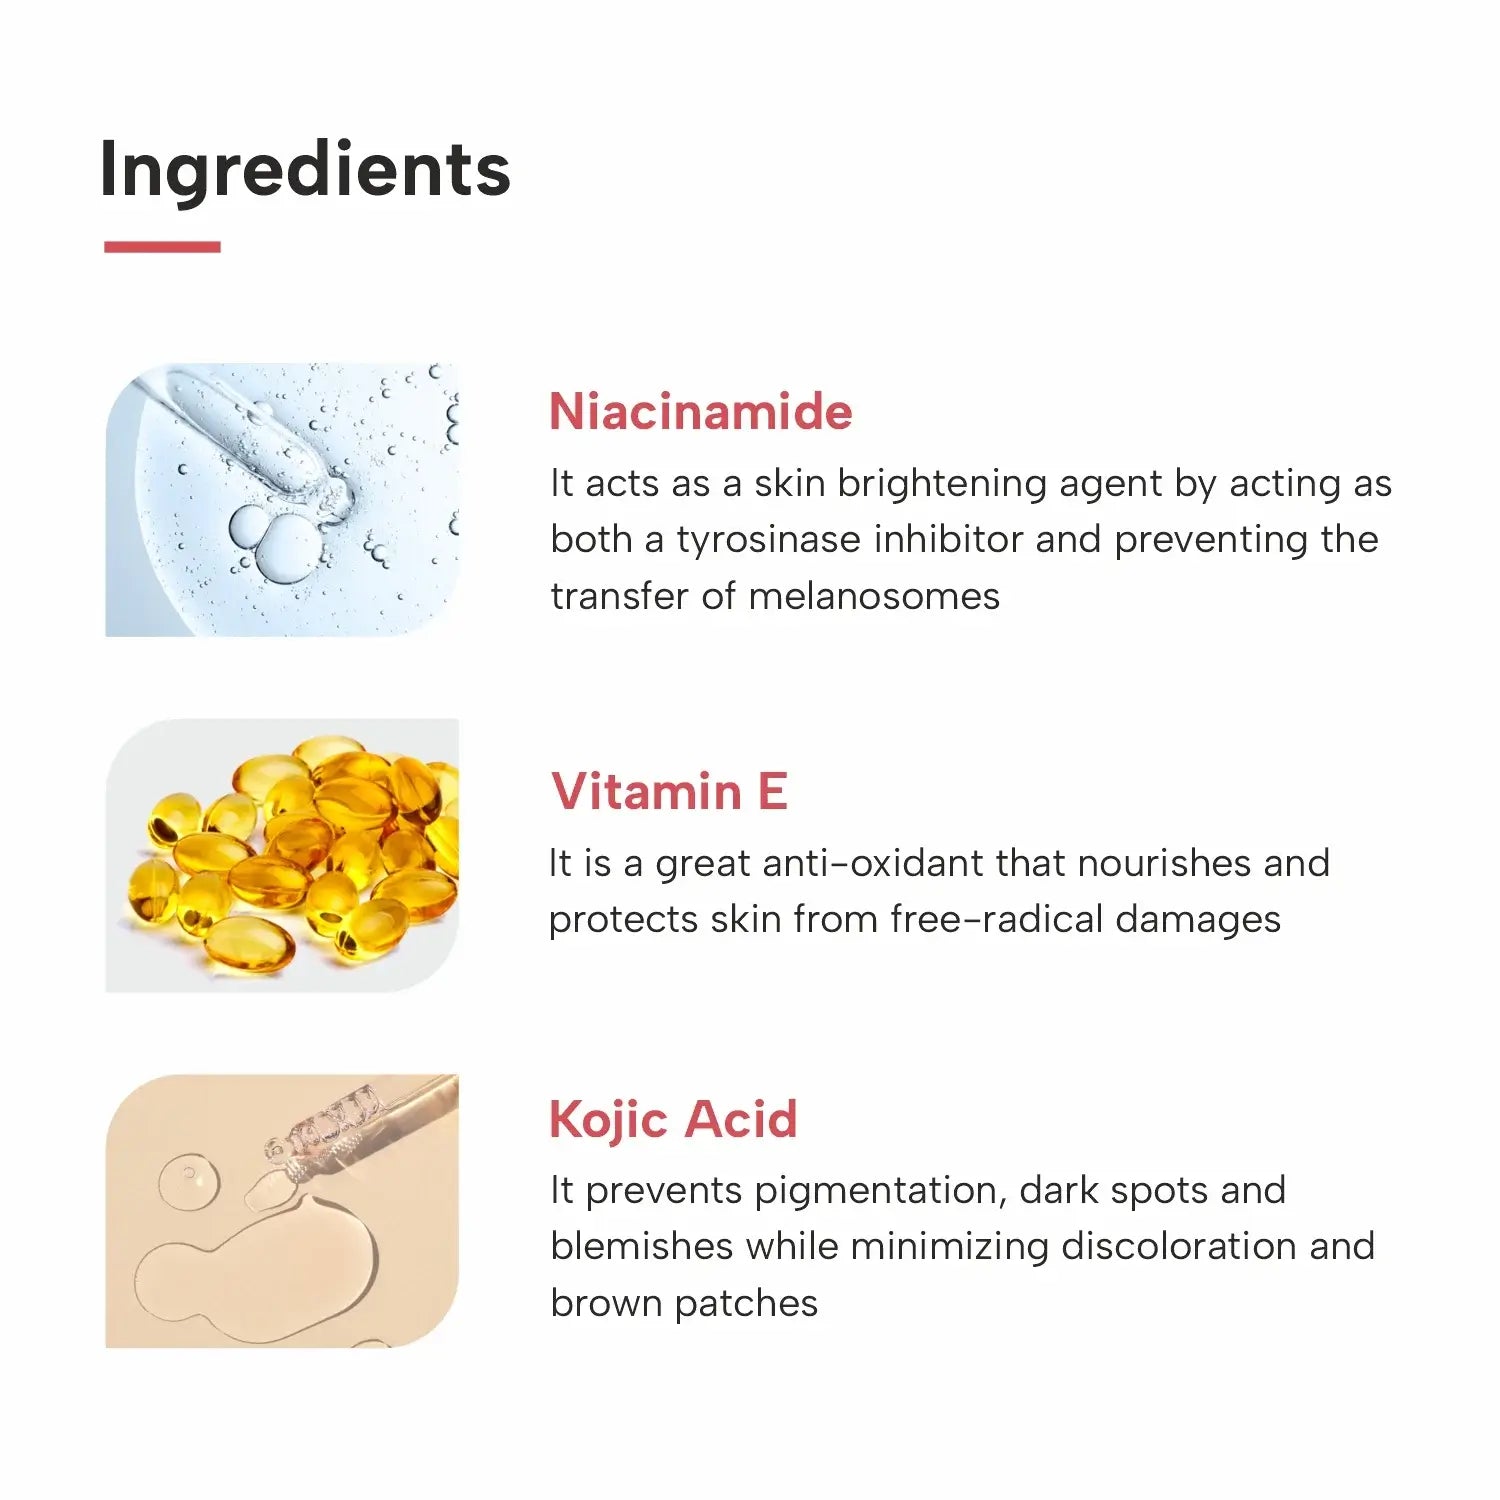 Ingredients of  Dailyglow Bright & Even Skin Tone Face Wash 